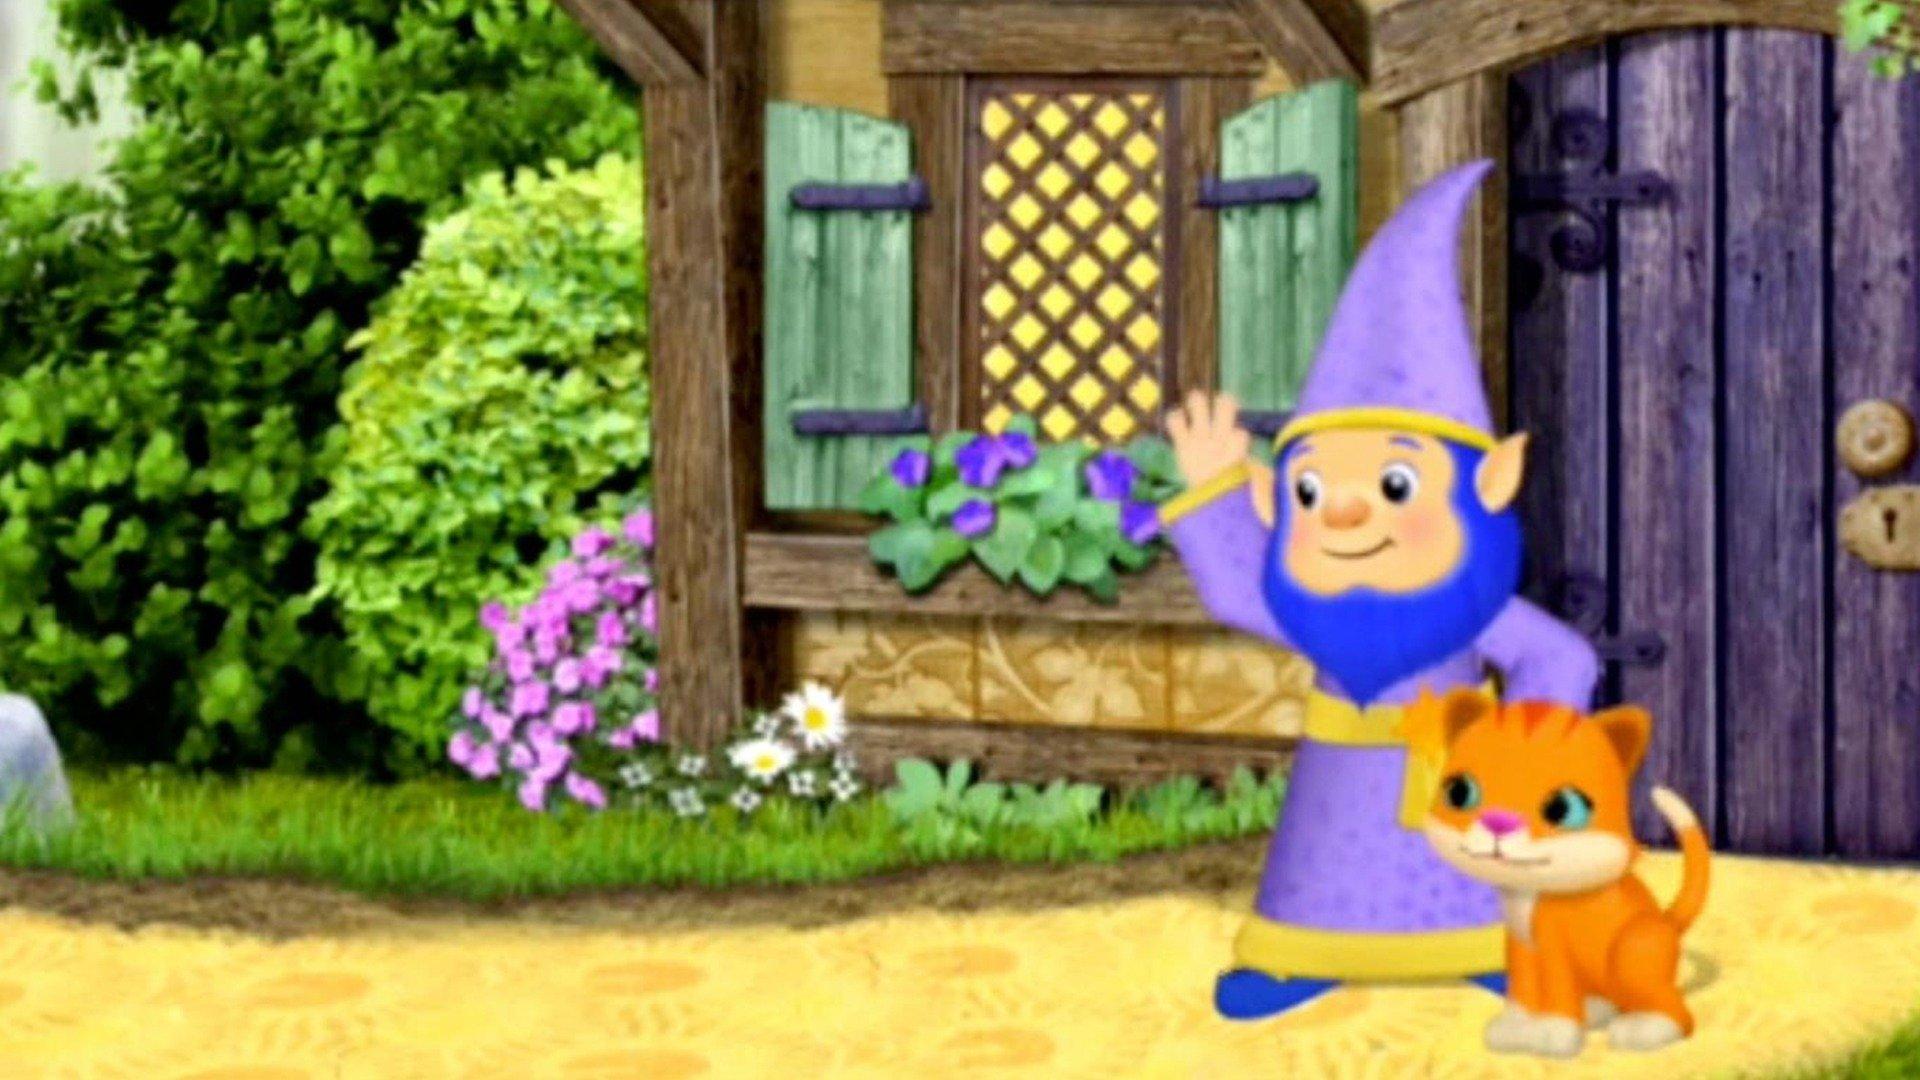 team-umizoomi-lost-fairy-tales-in-the-city